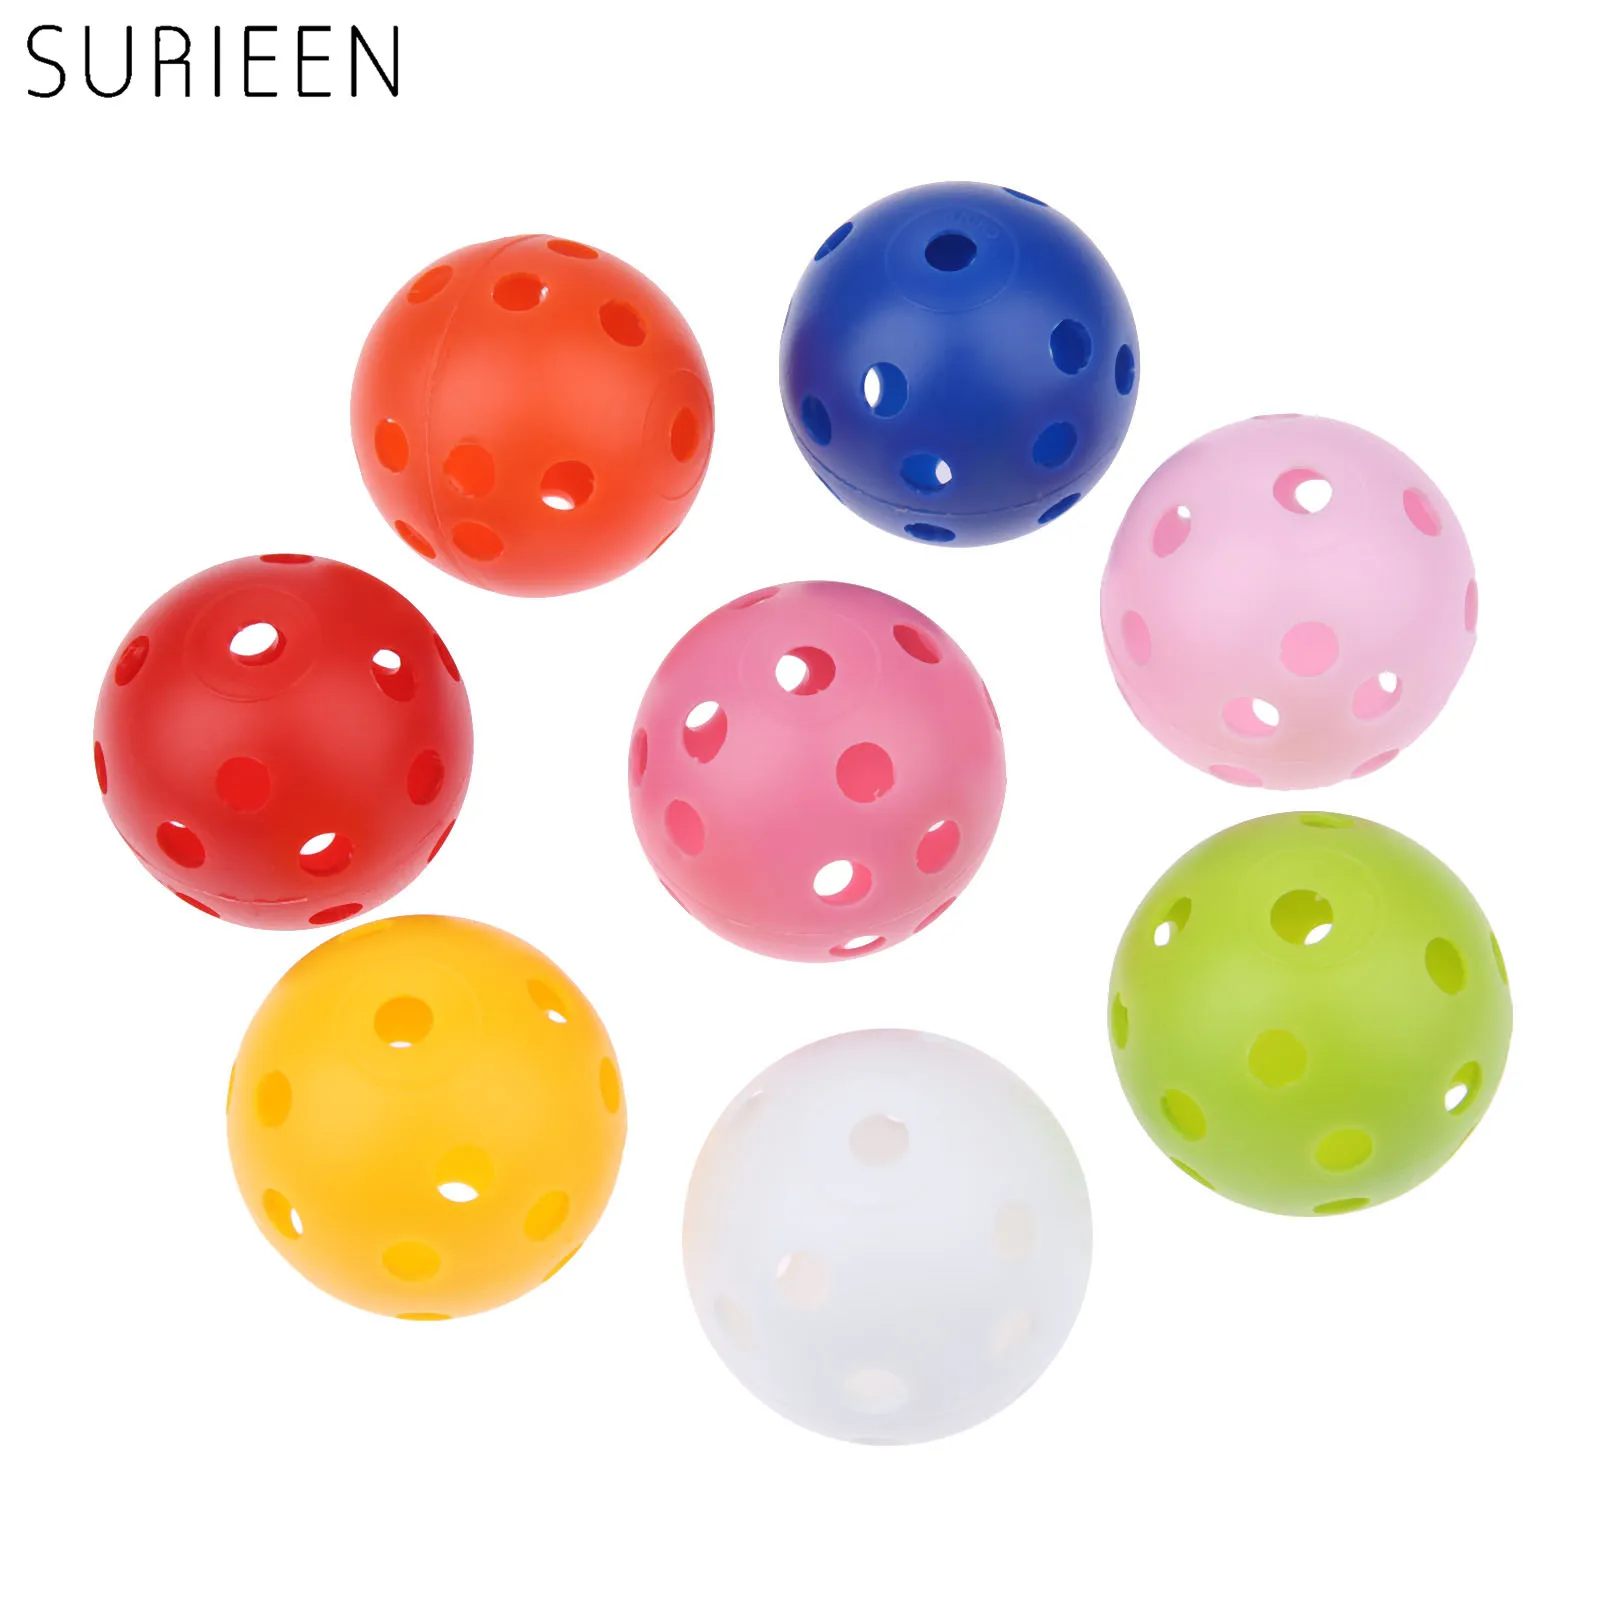 

SURIEEN 10Pcs Plastic Golf Balls 41mm Airflow Hollow with Hole Golf Balls for Indoor Outdoor Sports Training Golf Practice Balls